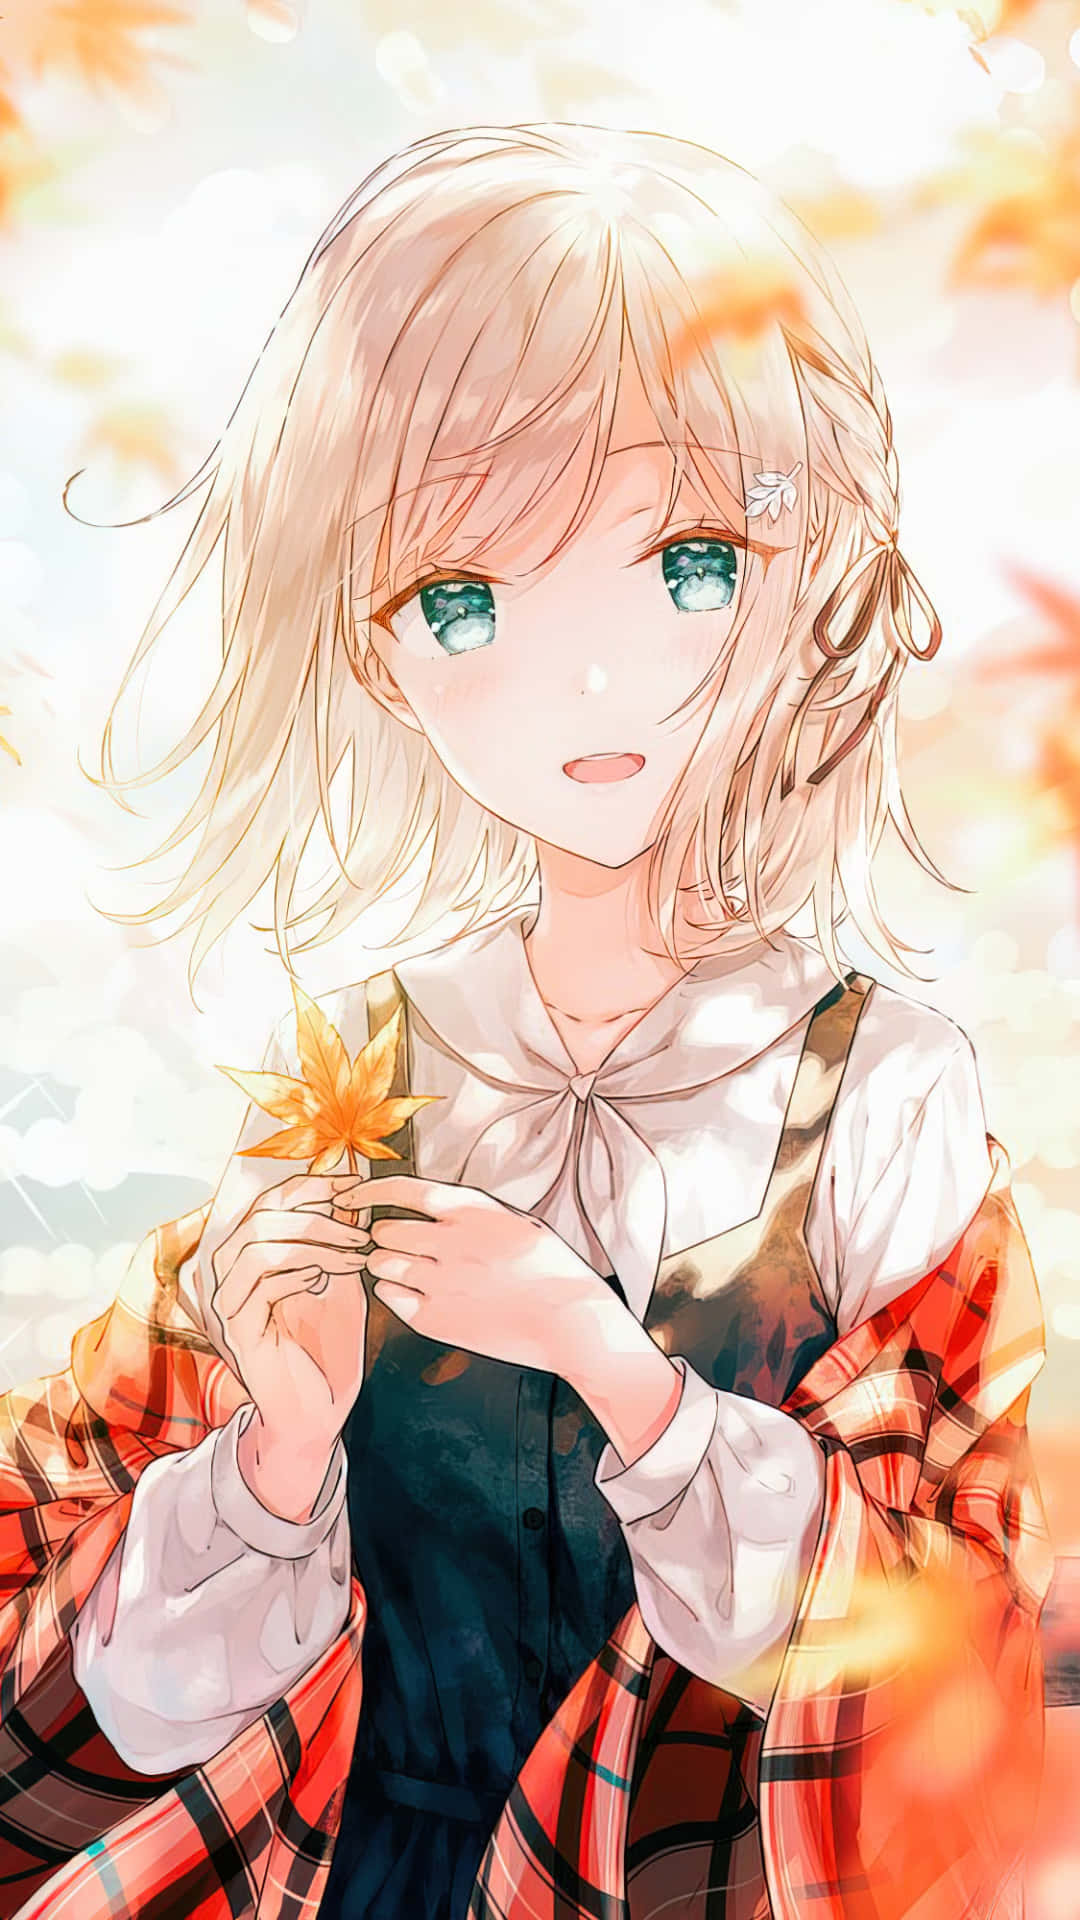 Download Cute Girl Orange Anime Scene With Maple Leaves Wallpaper |  Wallpapers.com